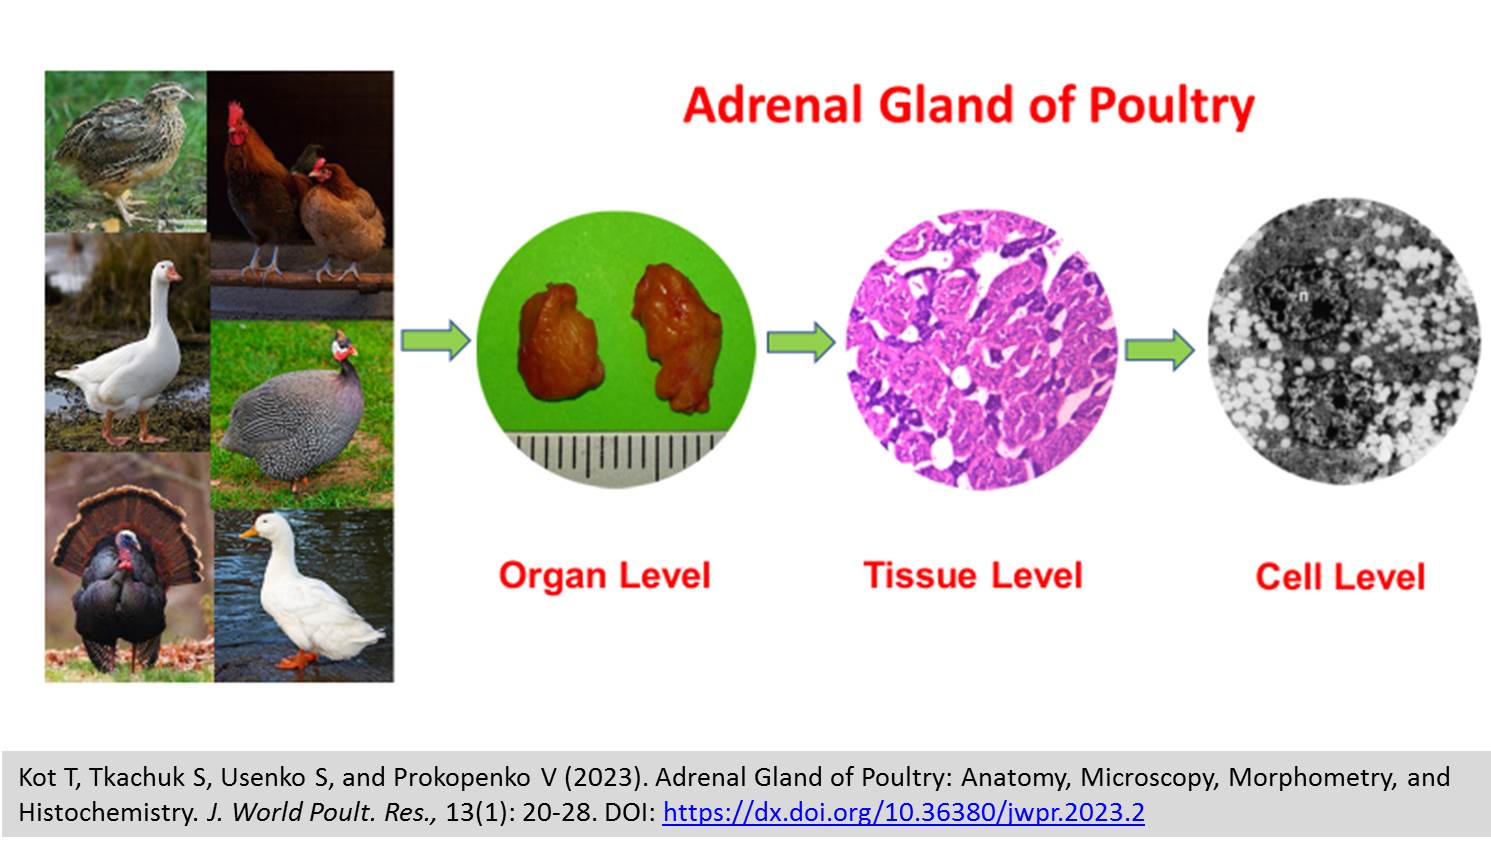 178-Adrenal_Gland_of_Poultry